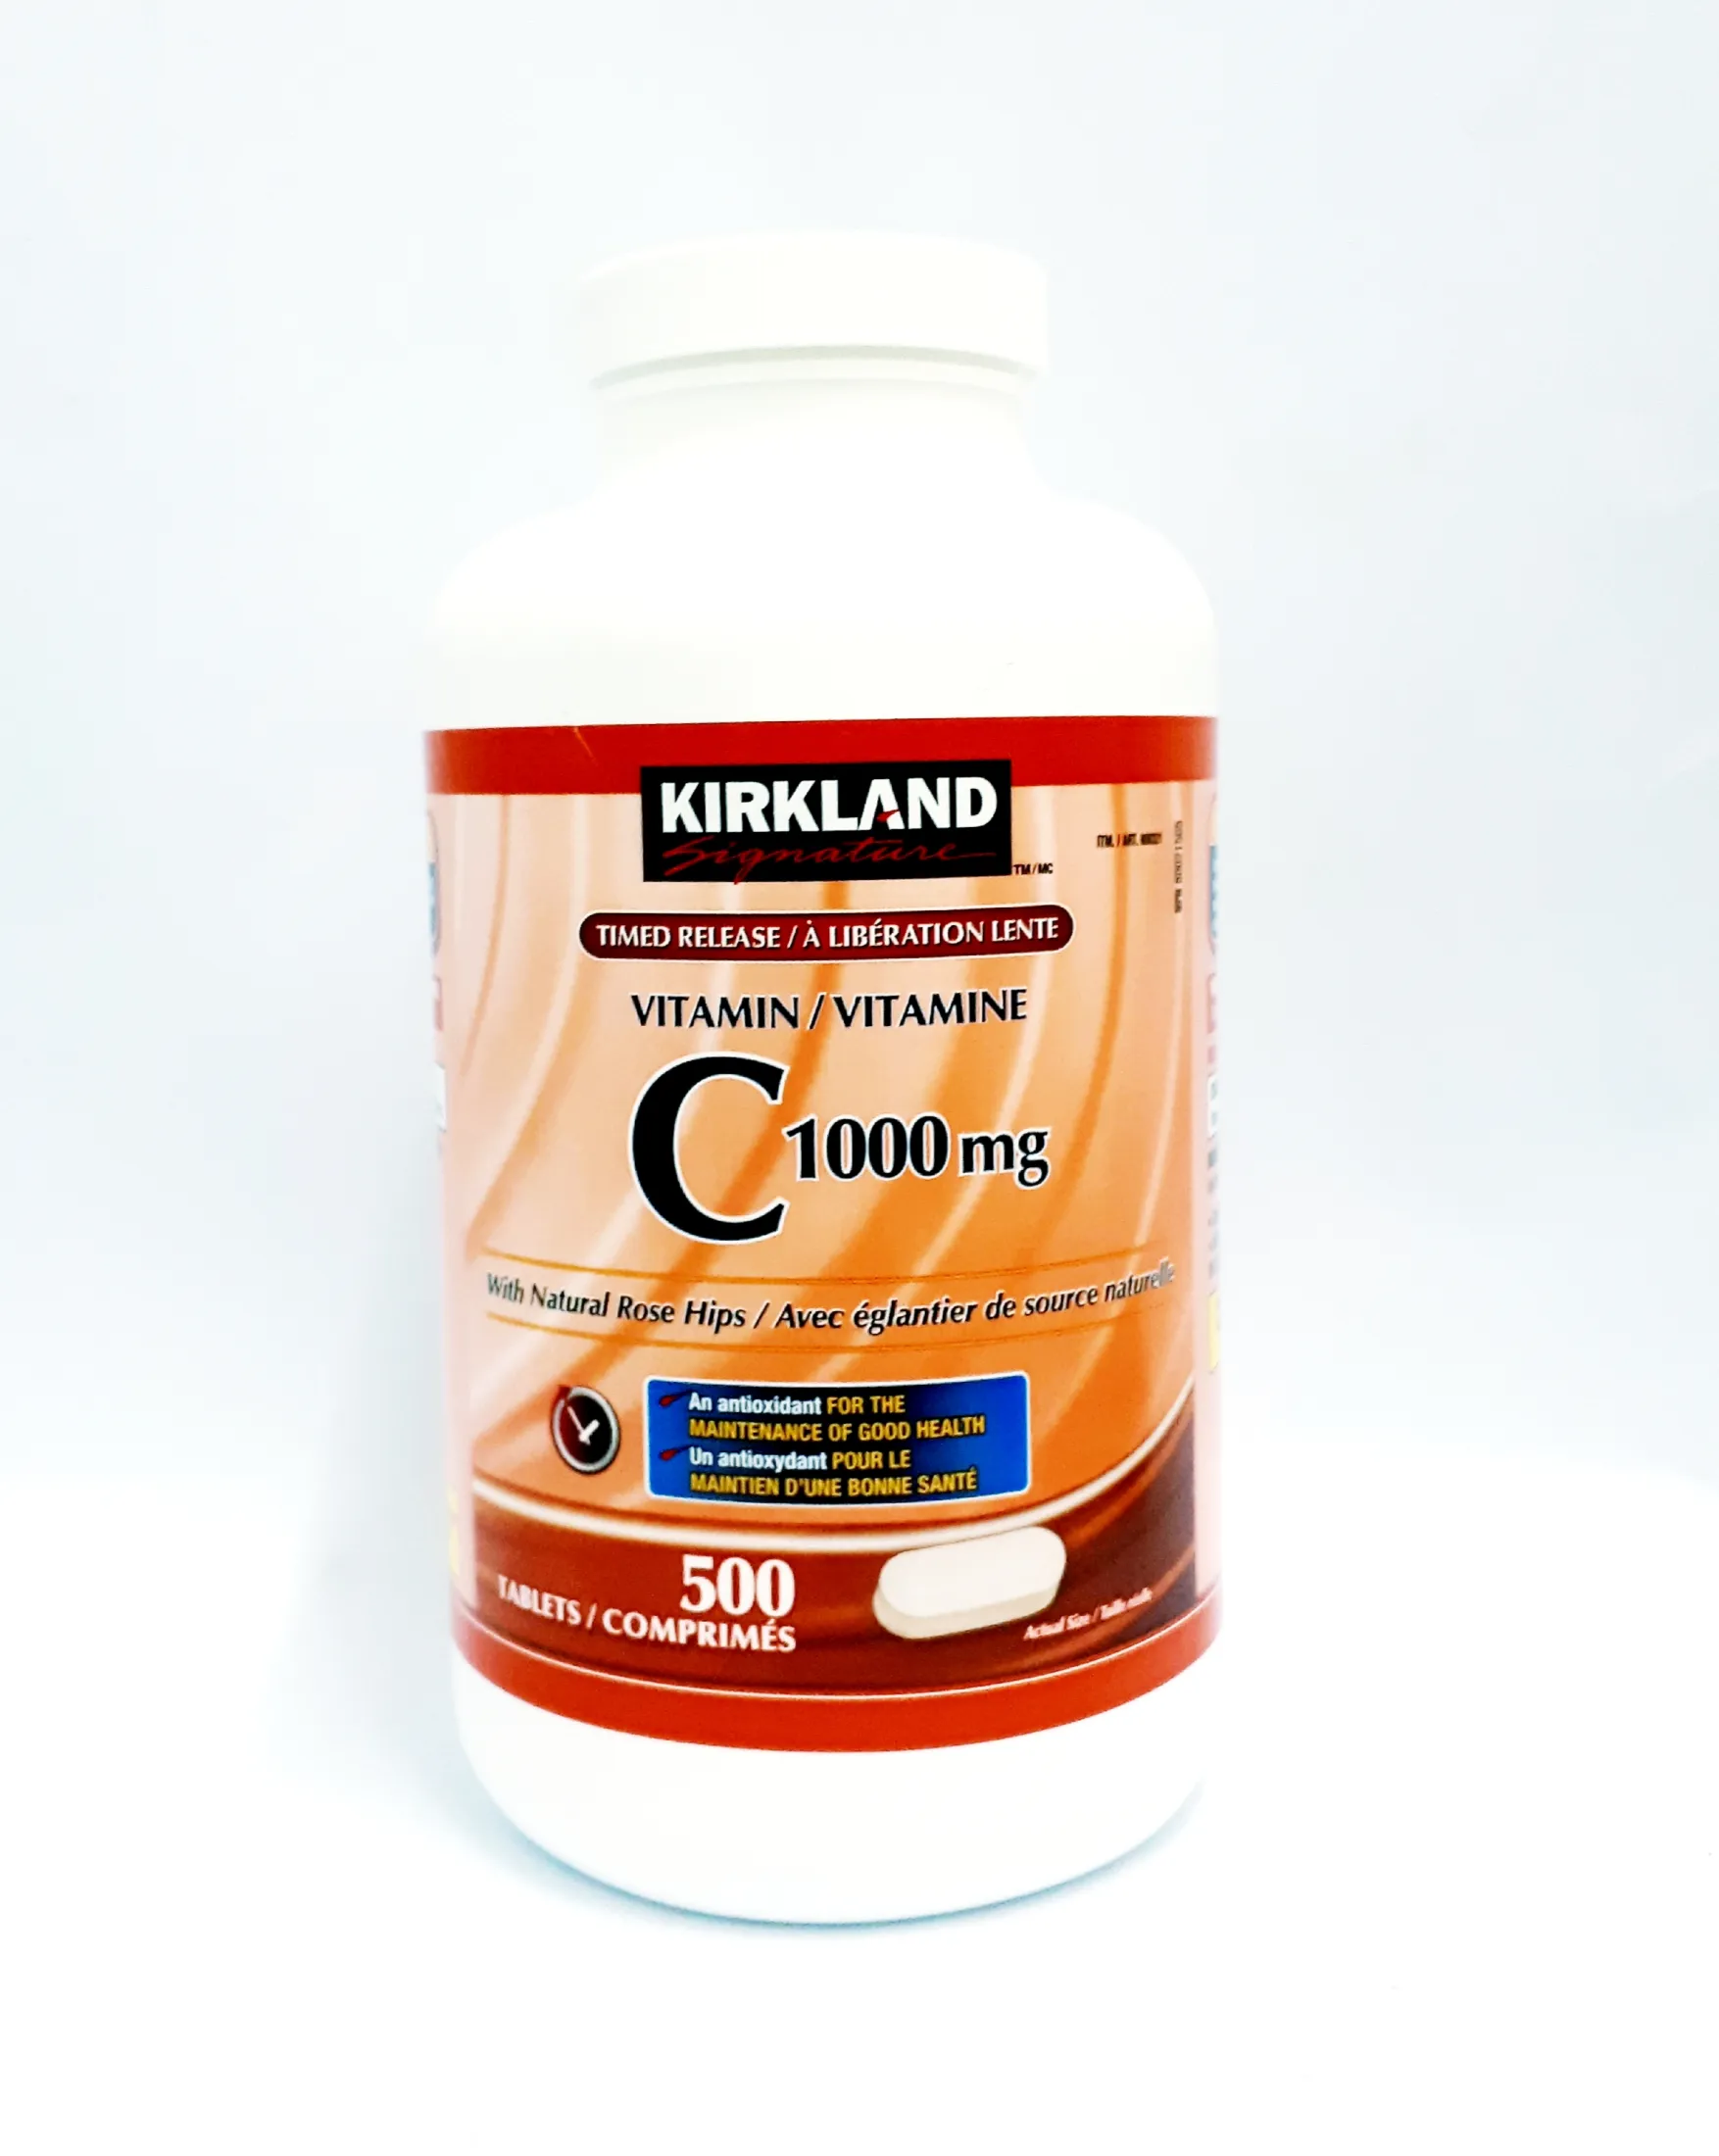 Kirkland Signature Vitamin C 1000 Mg 500 Tablets From Canada Exp 6 23 With Free 3 Sticks Of Immuniplus Traditional Herbal Drink Ready To Drink Expiry Date 6 23 Lazada Ph